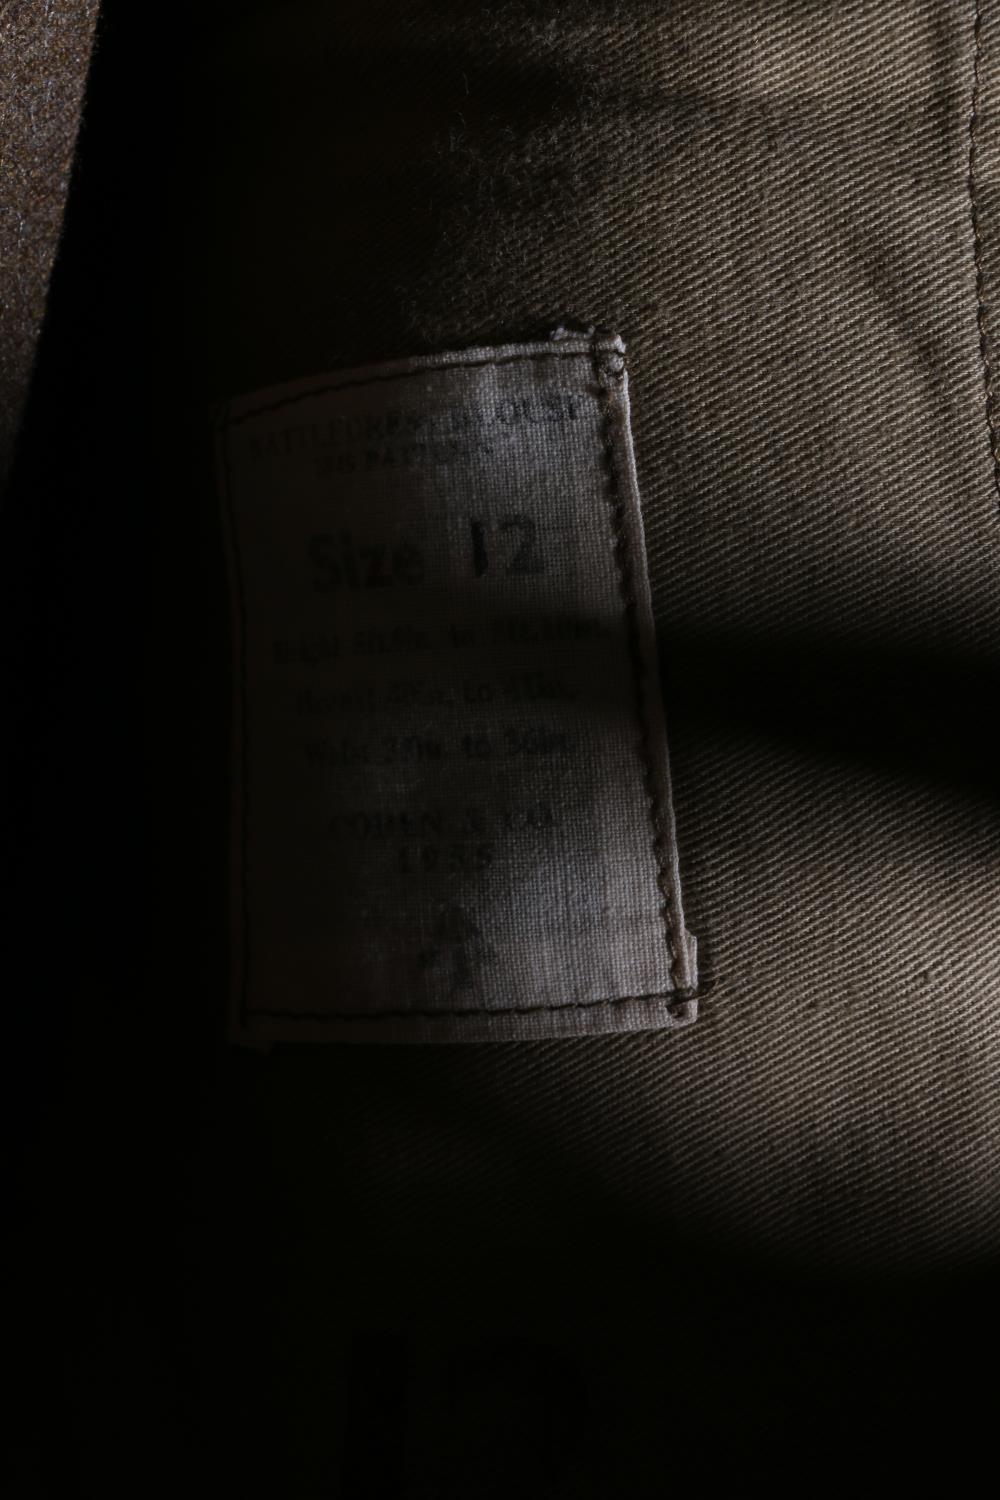 British Army uniform, a 1949 pattern Battledress blouse jacket with interior pocket label by Cohen - Image 3 of 5